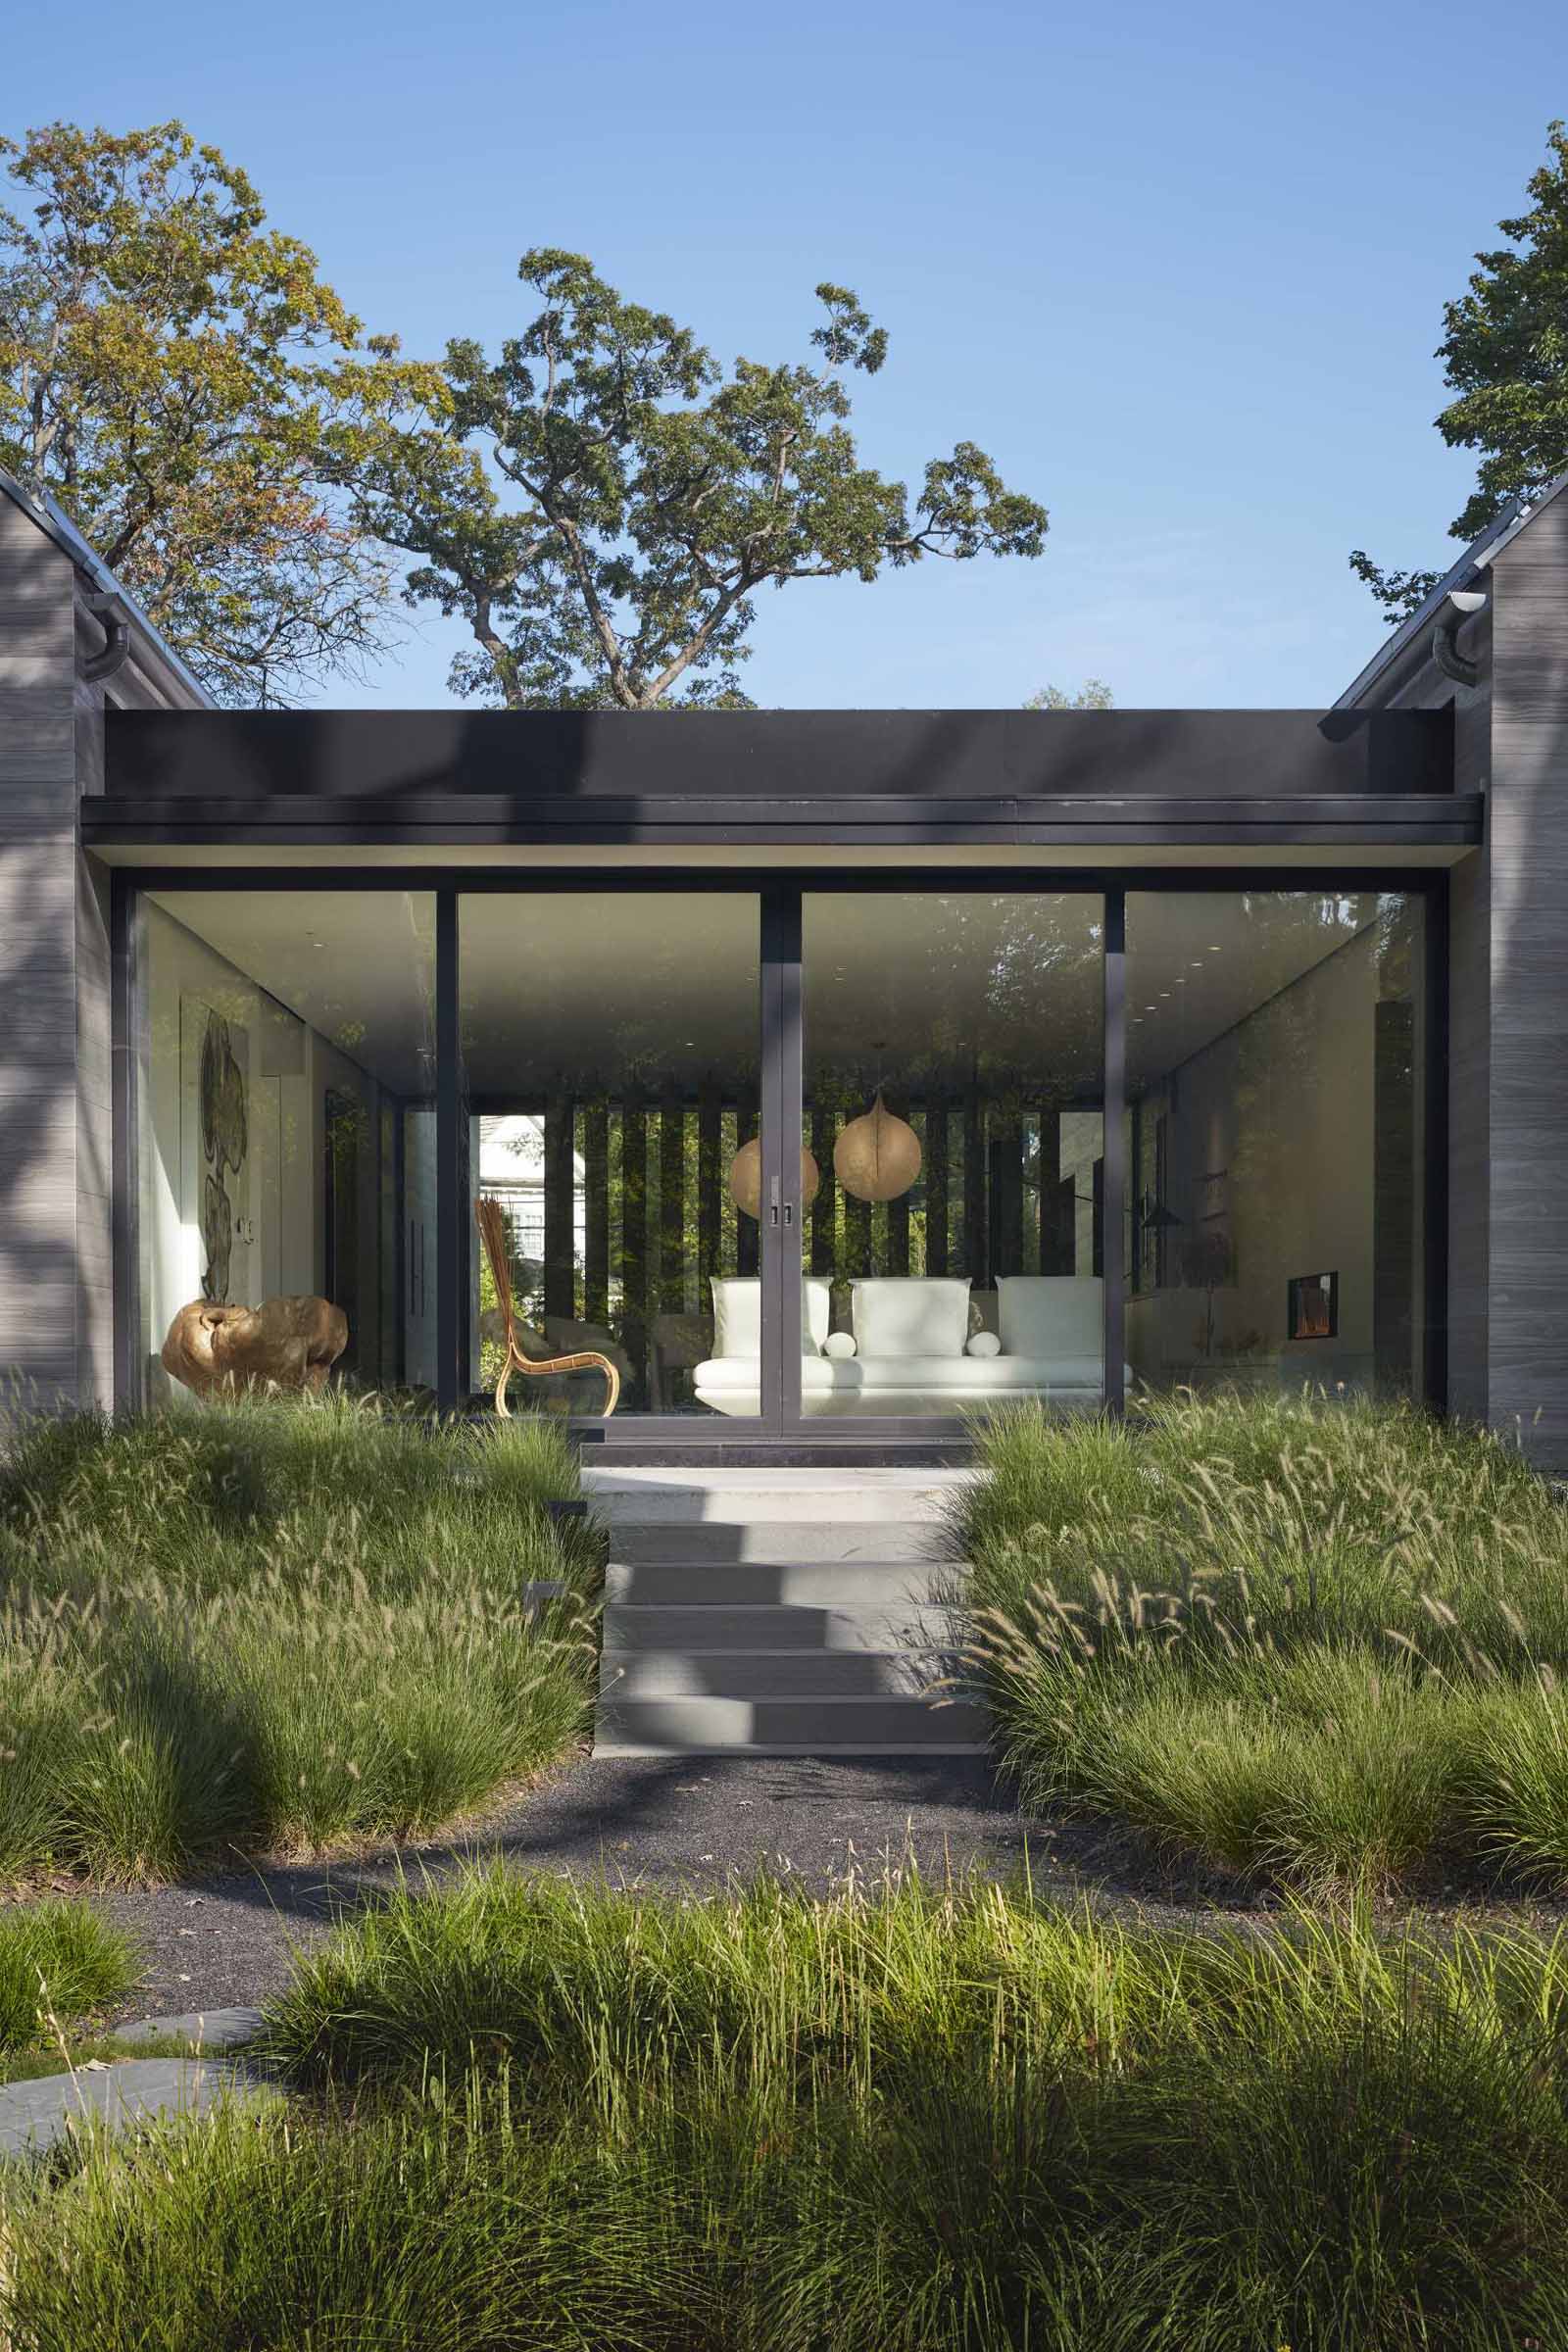 Sliding glass doors open the breezeway of this modern house to outdoor stairs flanked by various grasses.